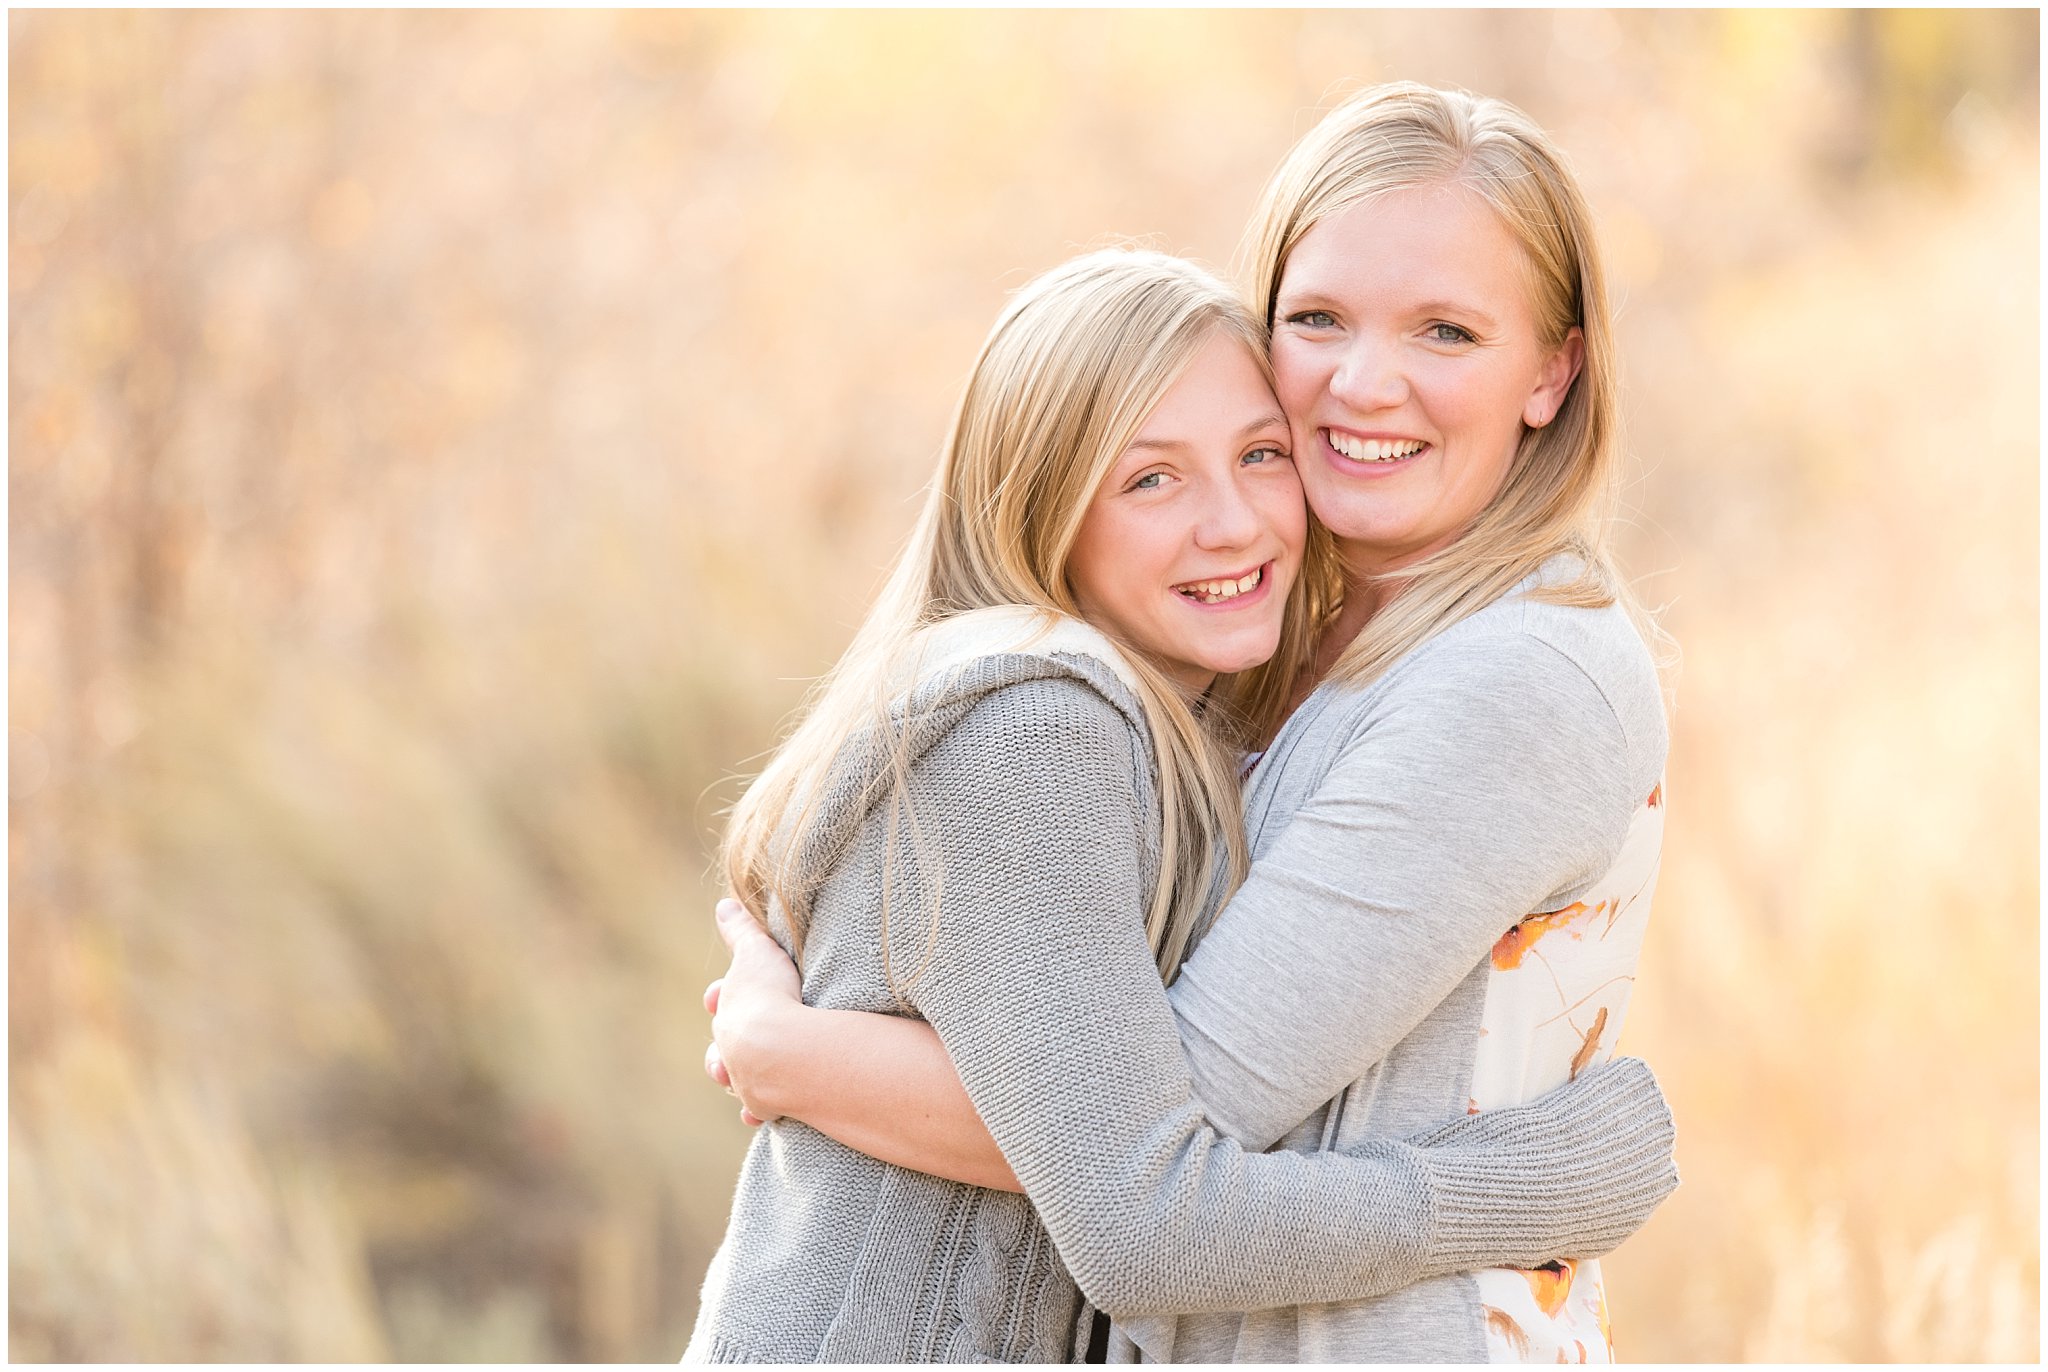 Mom and daughter portrait in the fall leaves | Fall family photo session at Snowbasin | Snowbasin Resort | Jessie and Dallin Photography